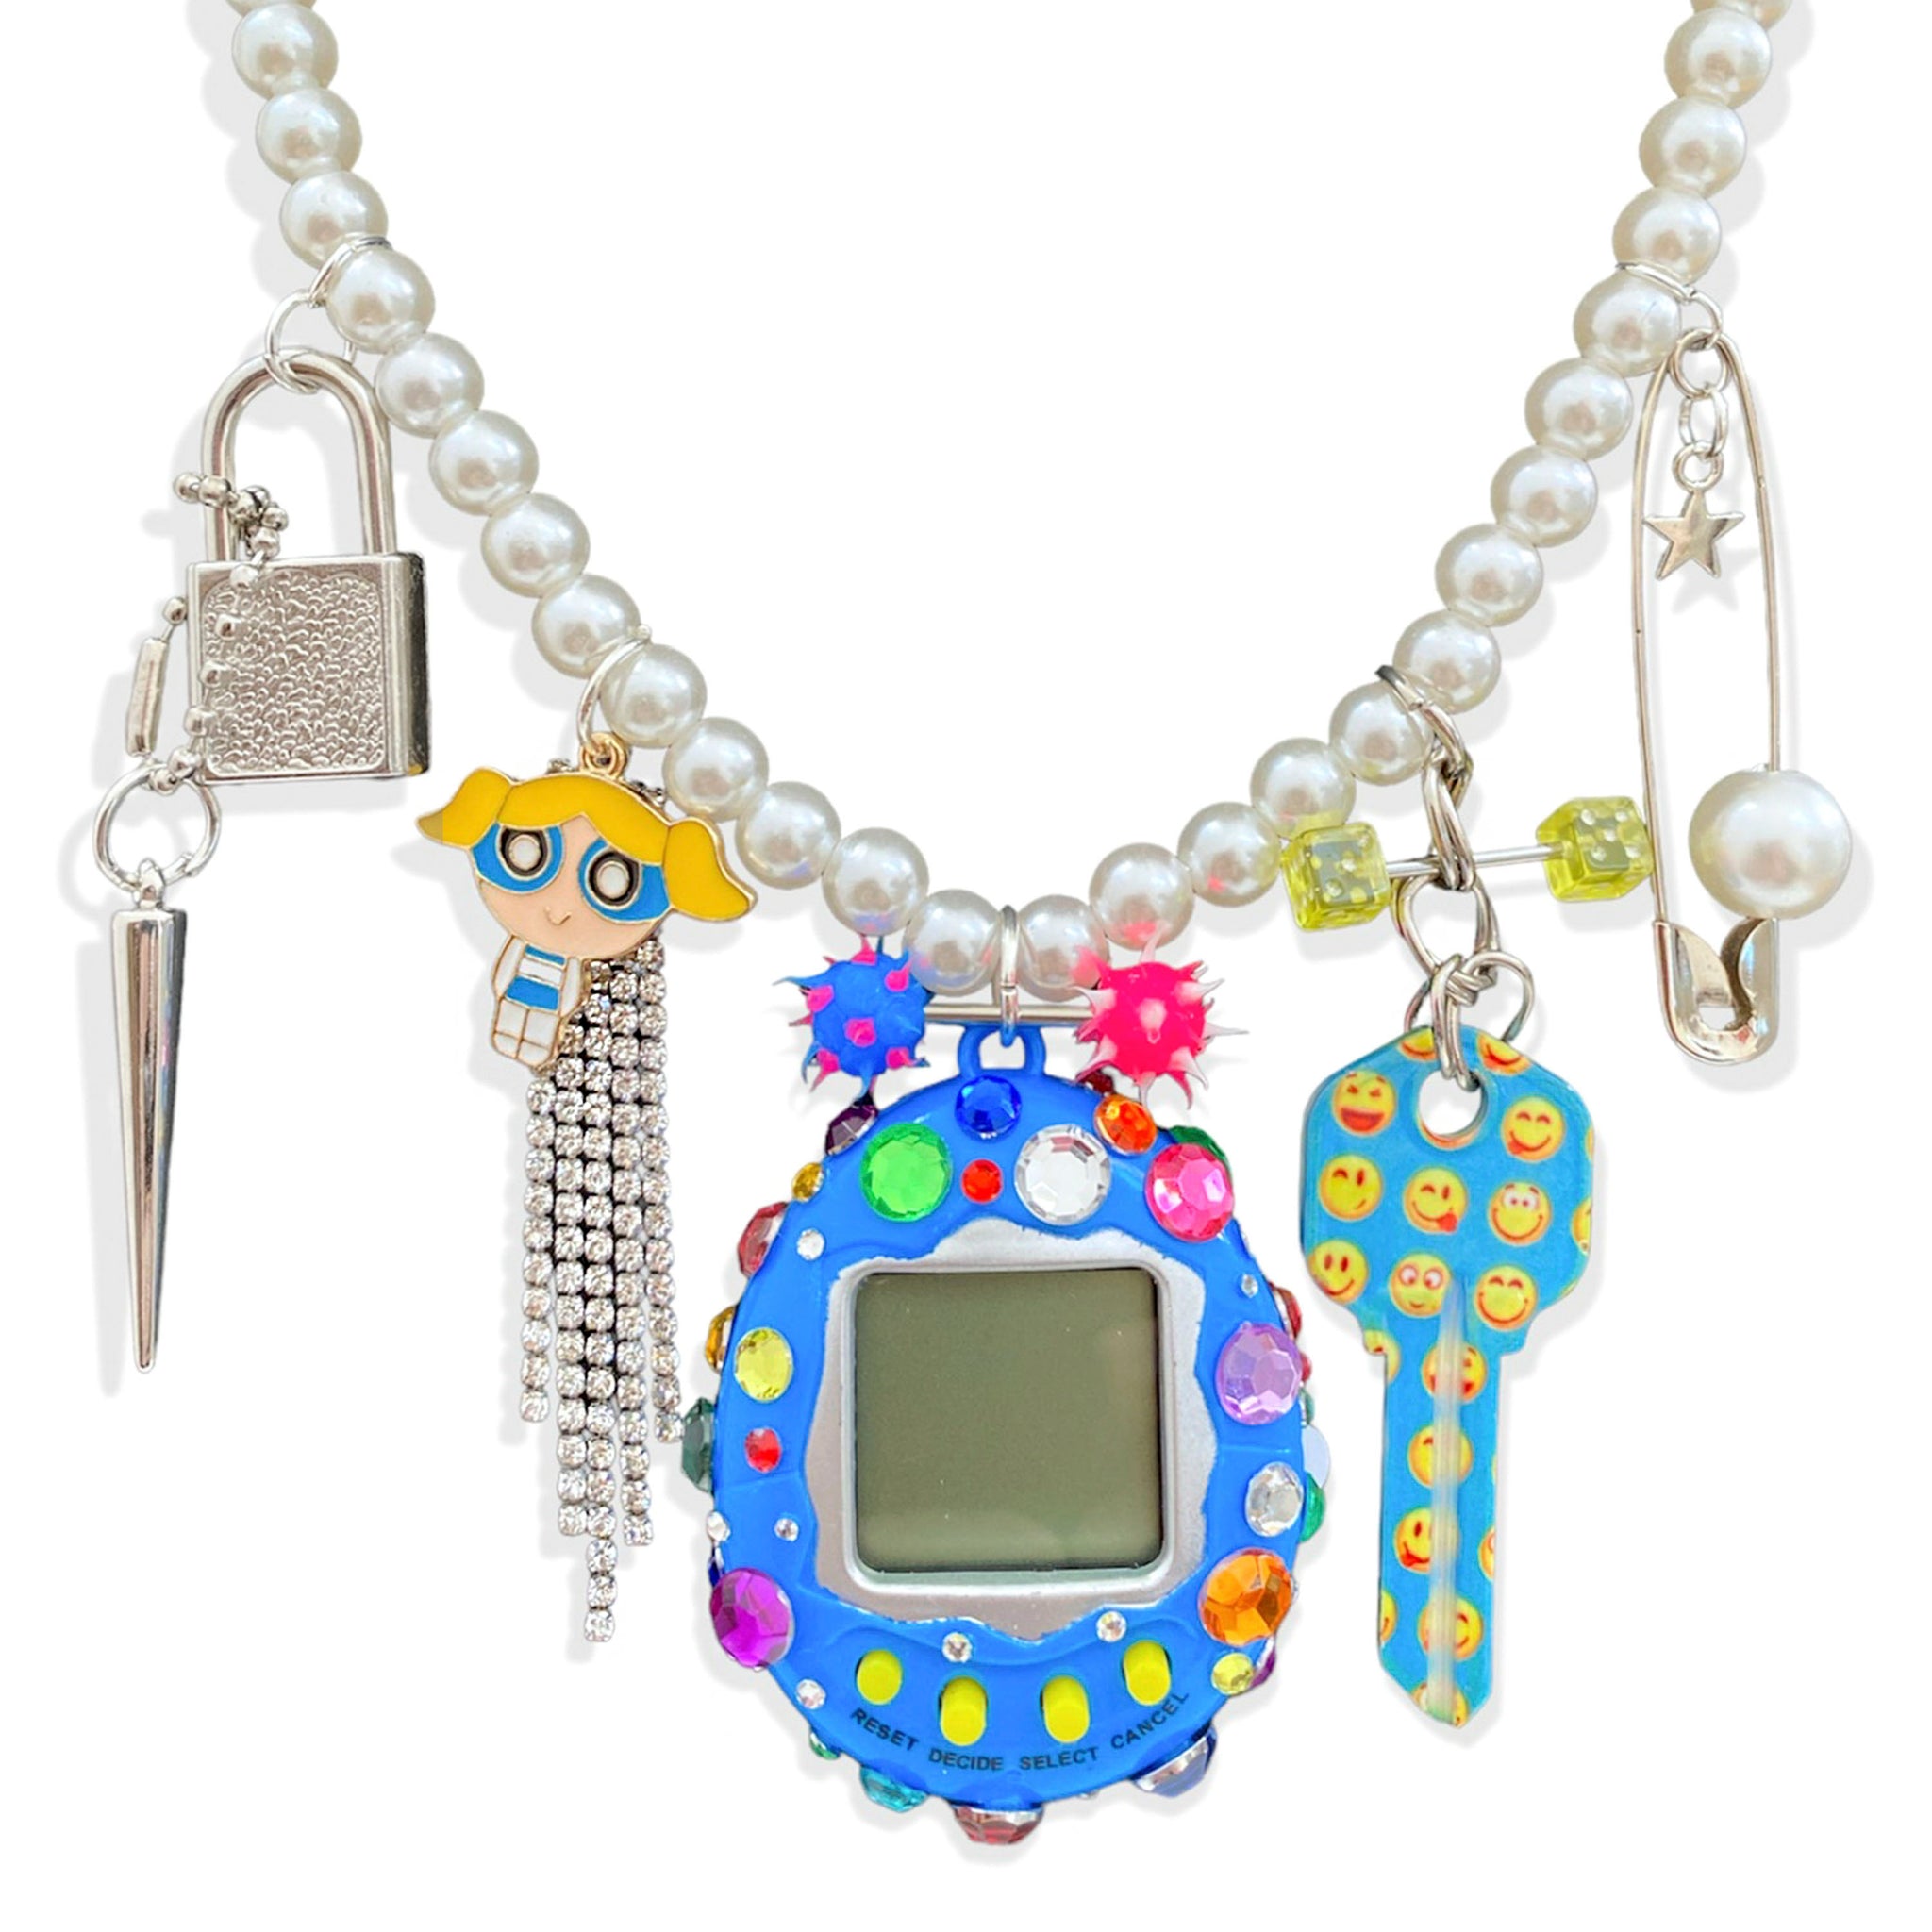 Bedazzled Tamagotchi Inspired Charm Necklace